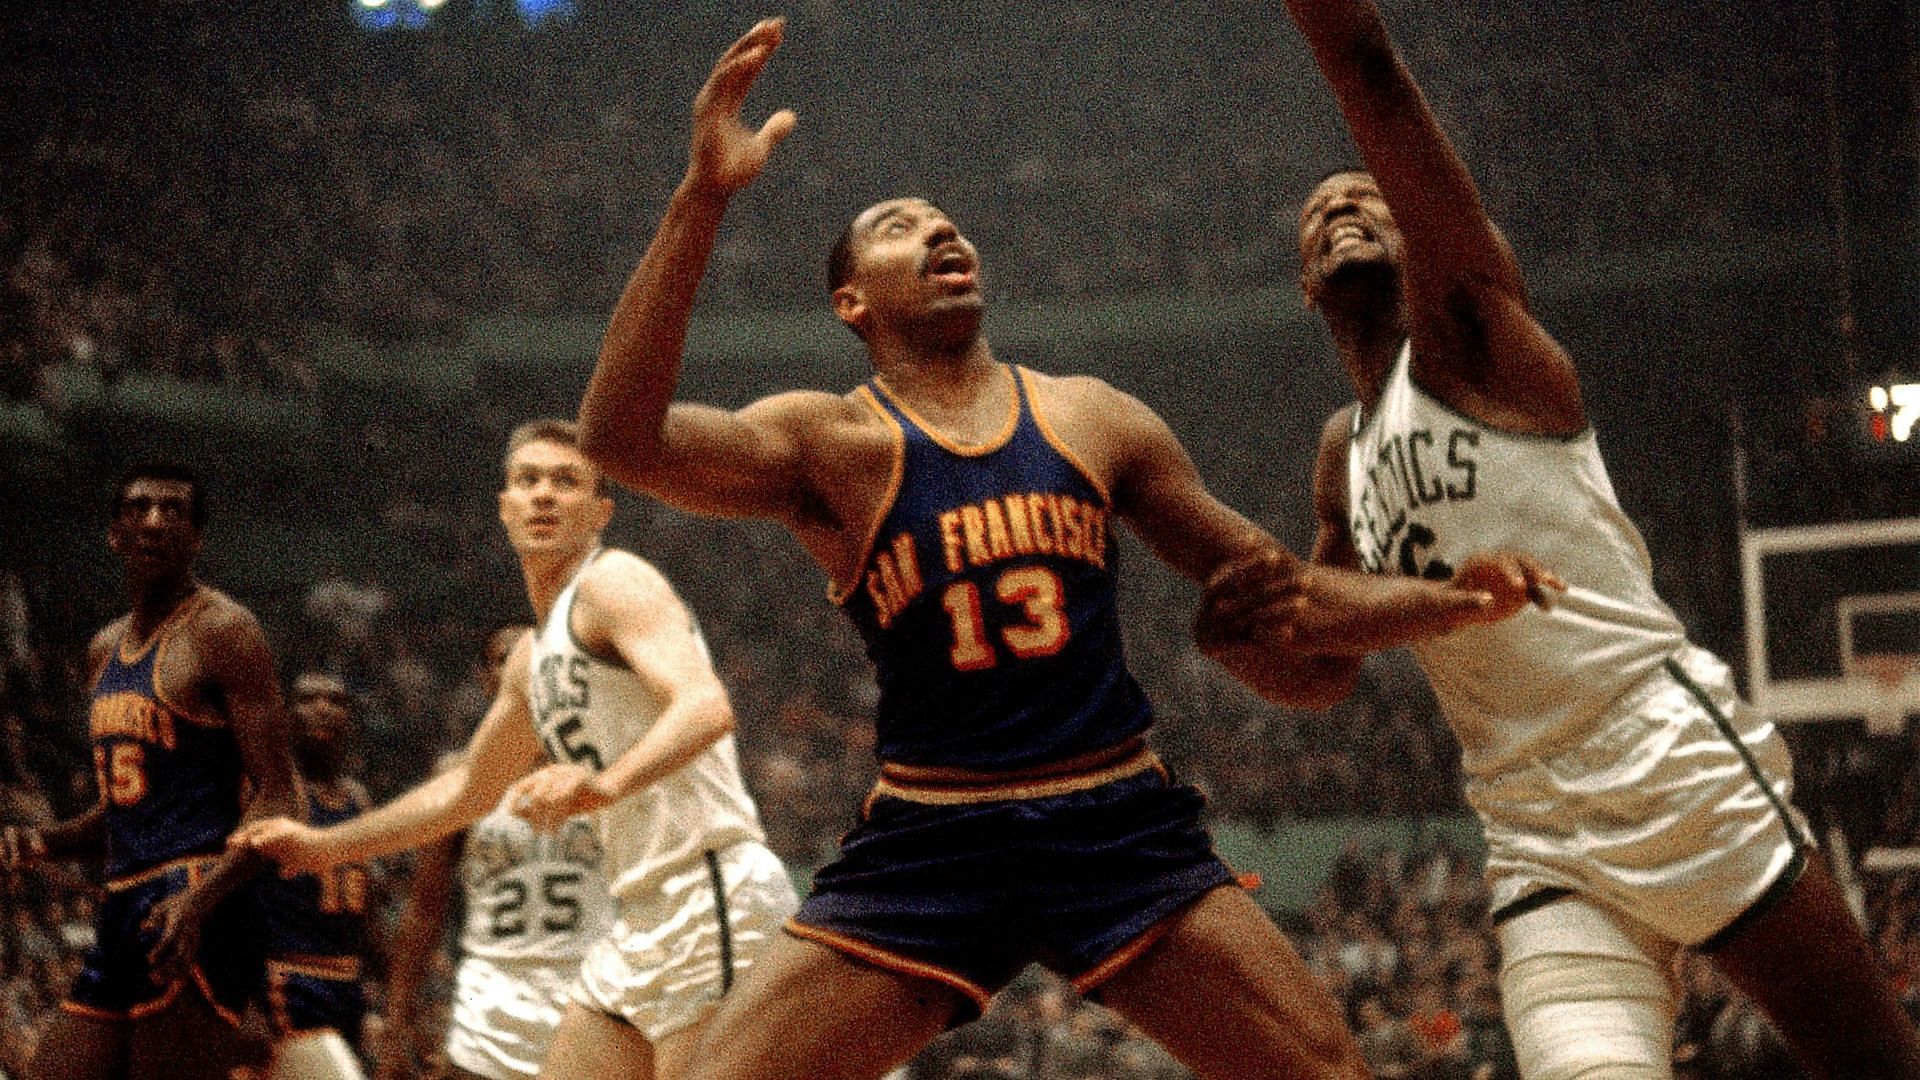 Wilt Chamberlain playing for the San Francisco Warriors